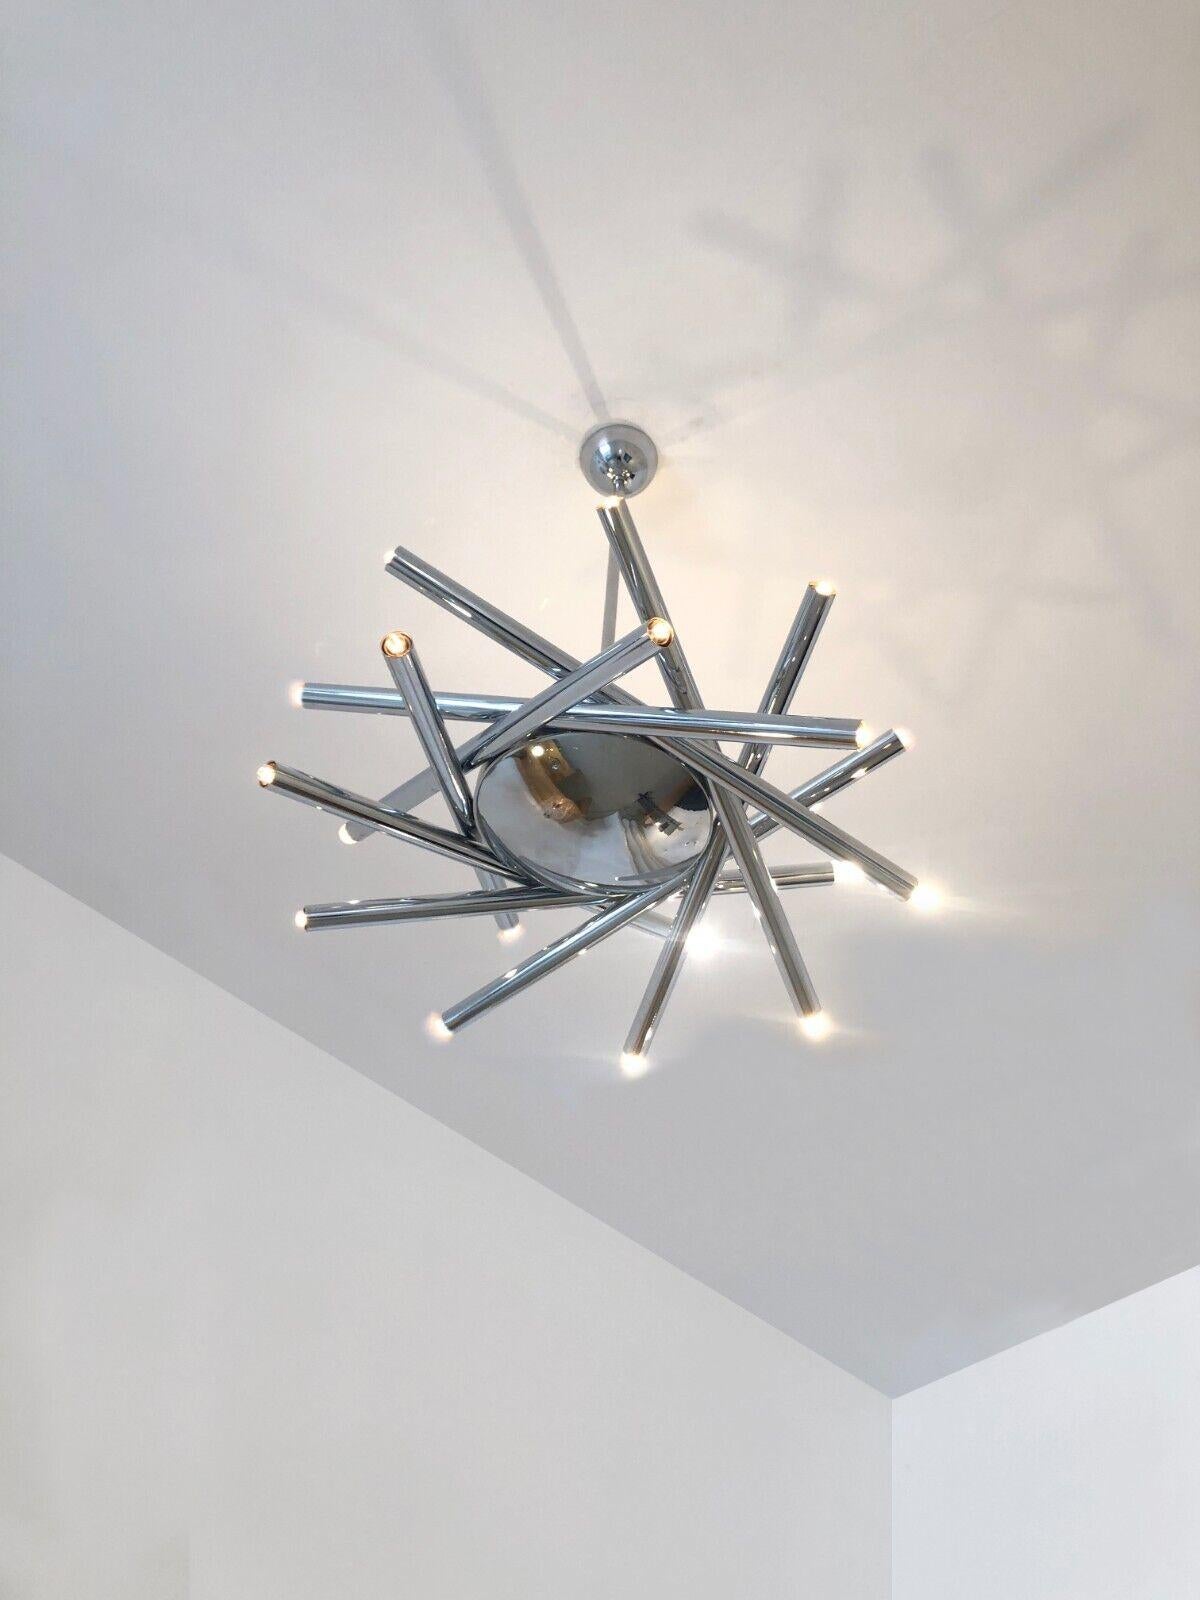 Italian A 18-Lights RADICAL SPACE-AGE POST-MODERN CEILING FIXTURE by STILNOVO Italy 1970 For Sale